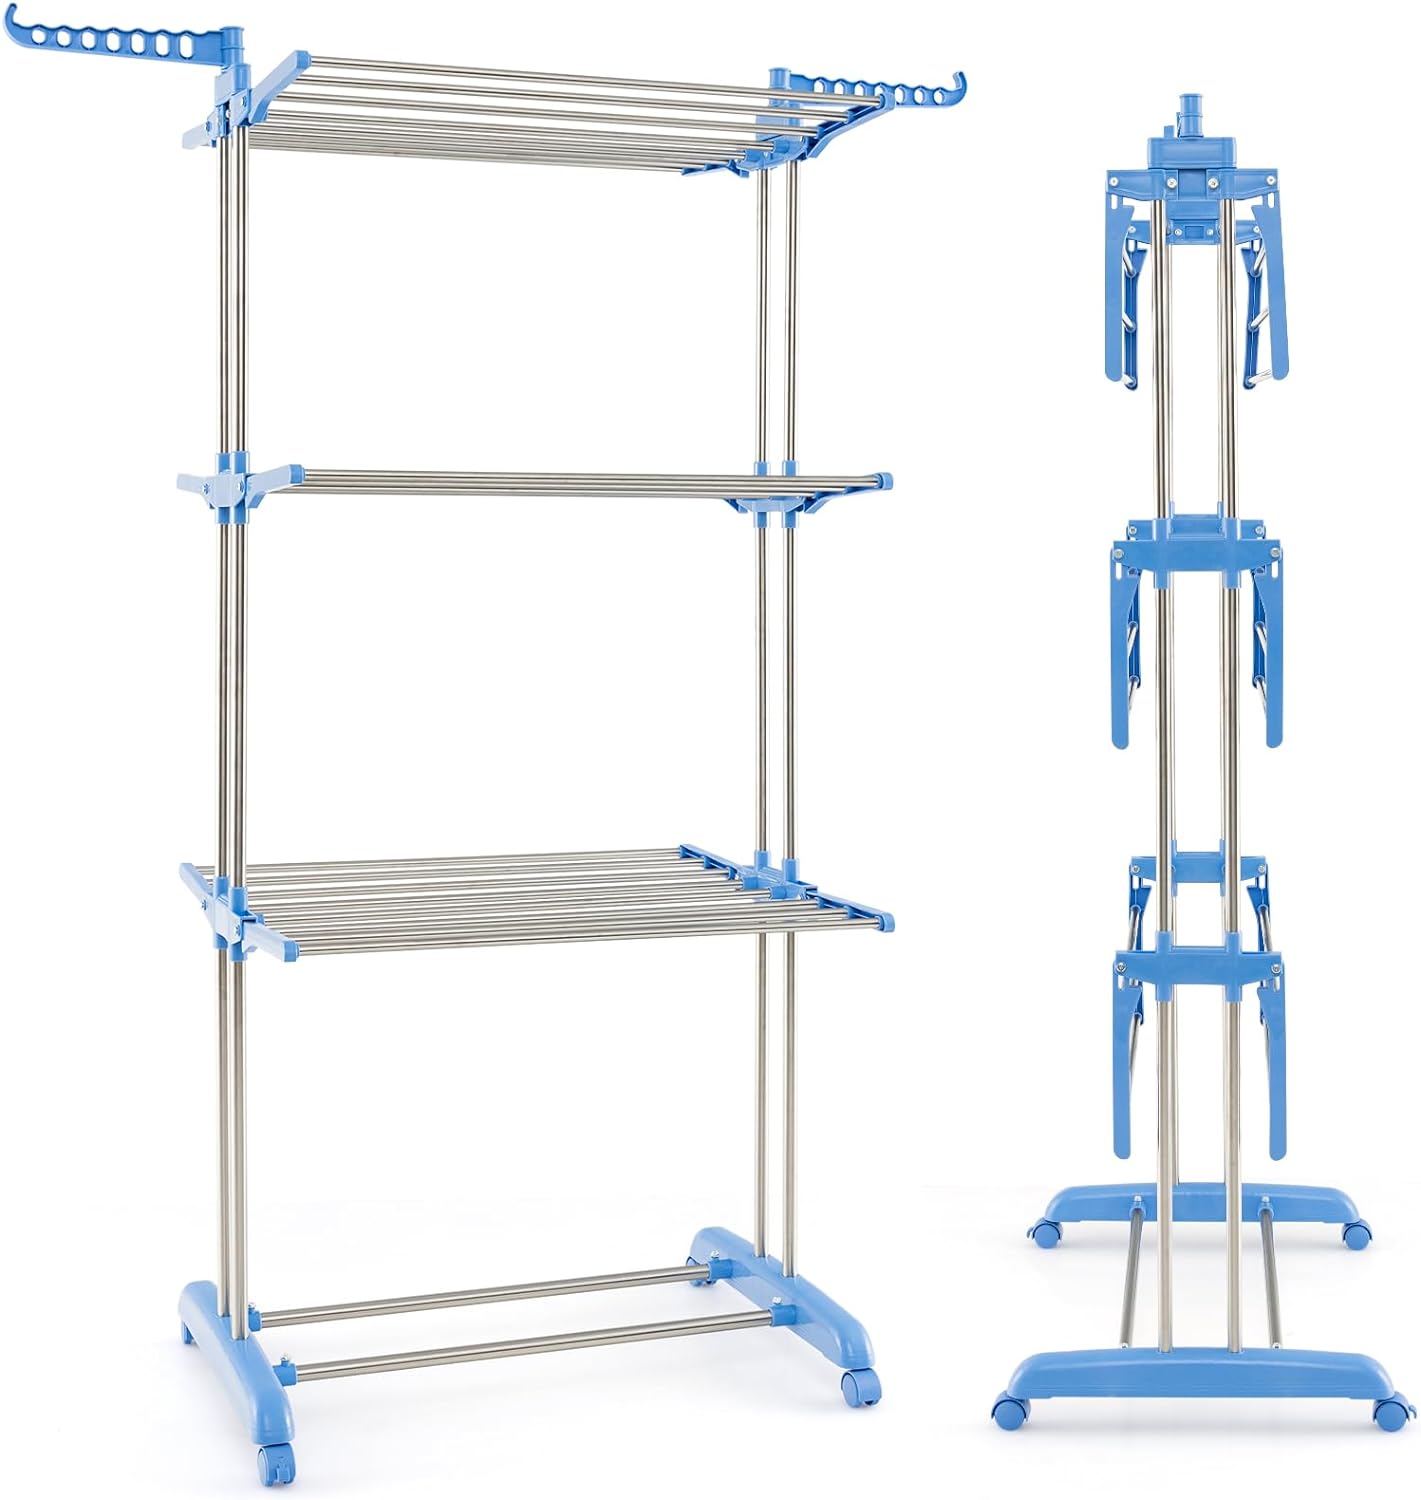 Giantex Foldable Clothes Drying Rack, Oversized 4-Tier Collapsible Laundry Rack w/ 3 Retractable Trays